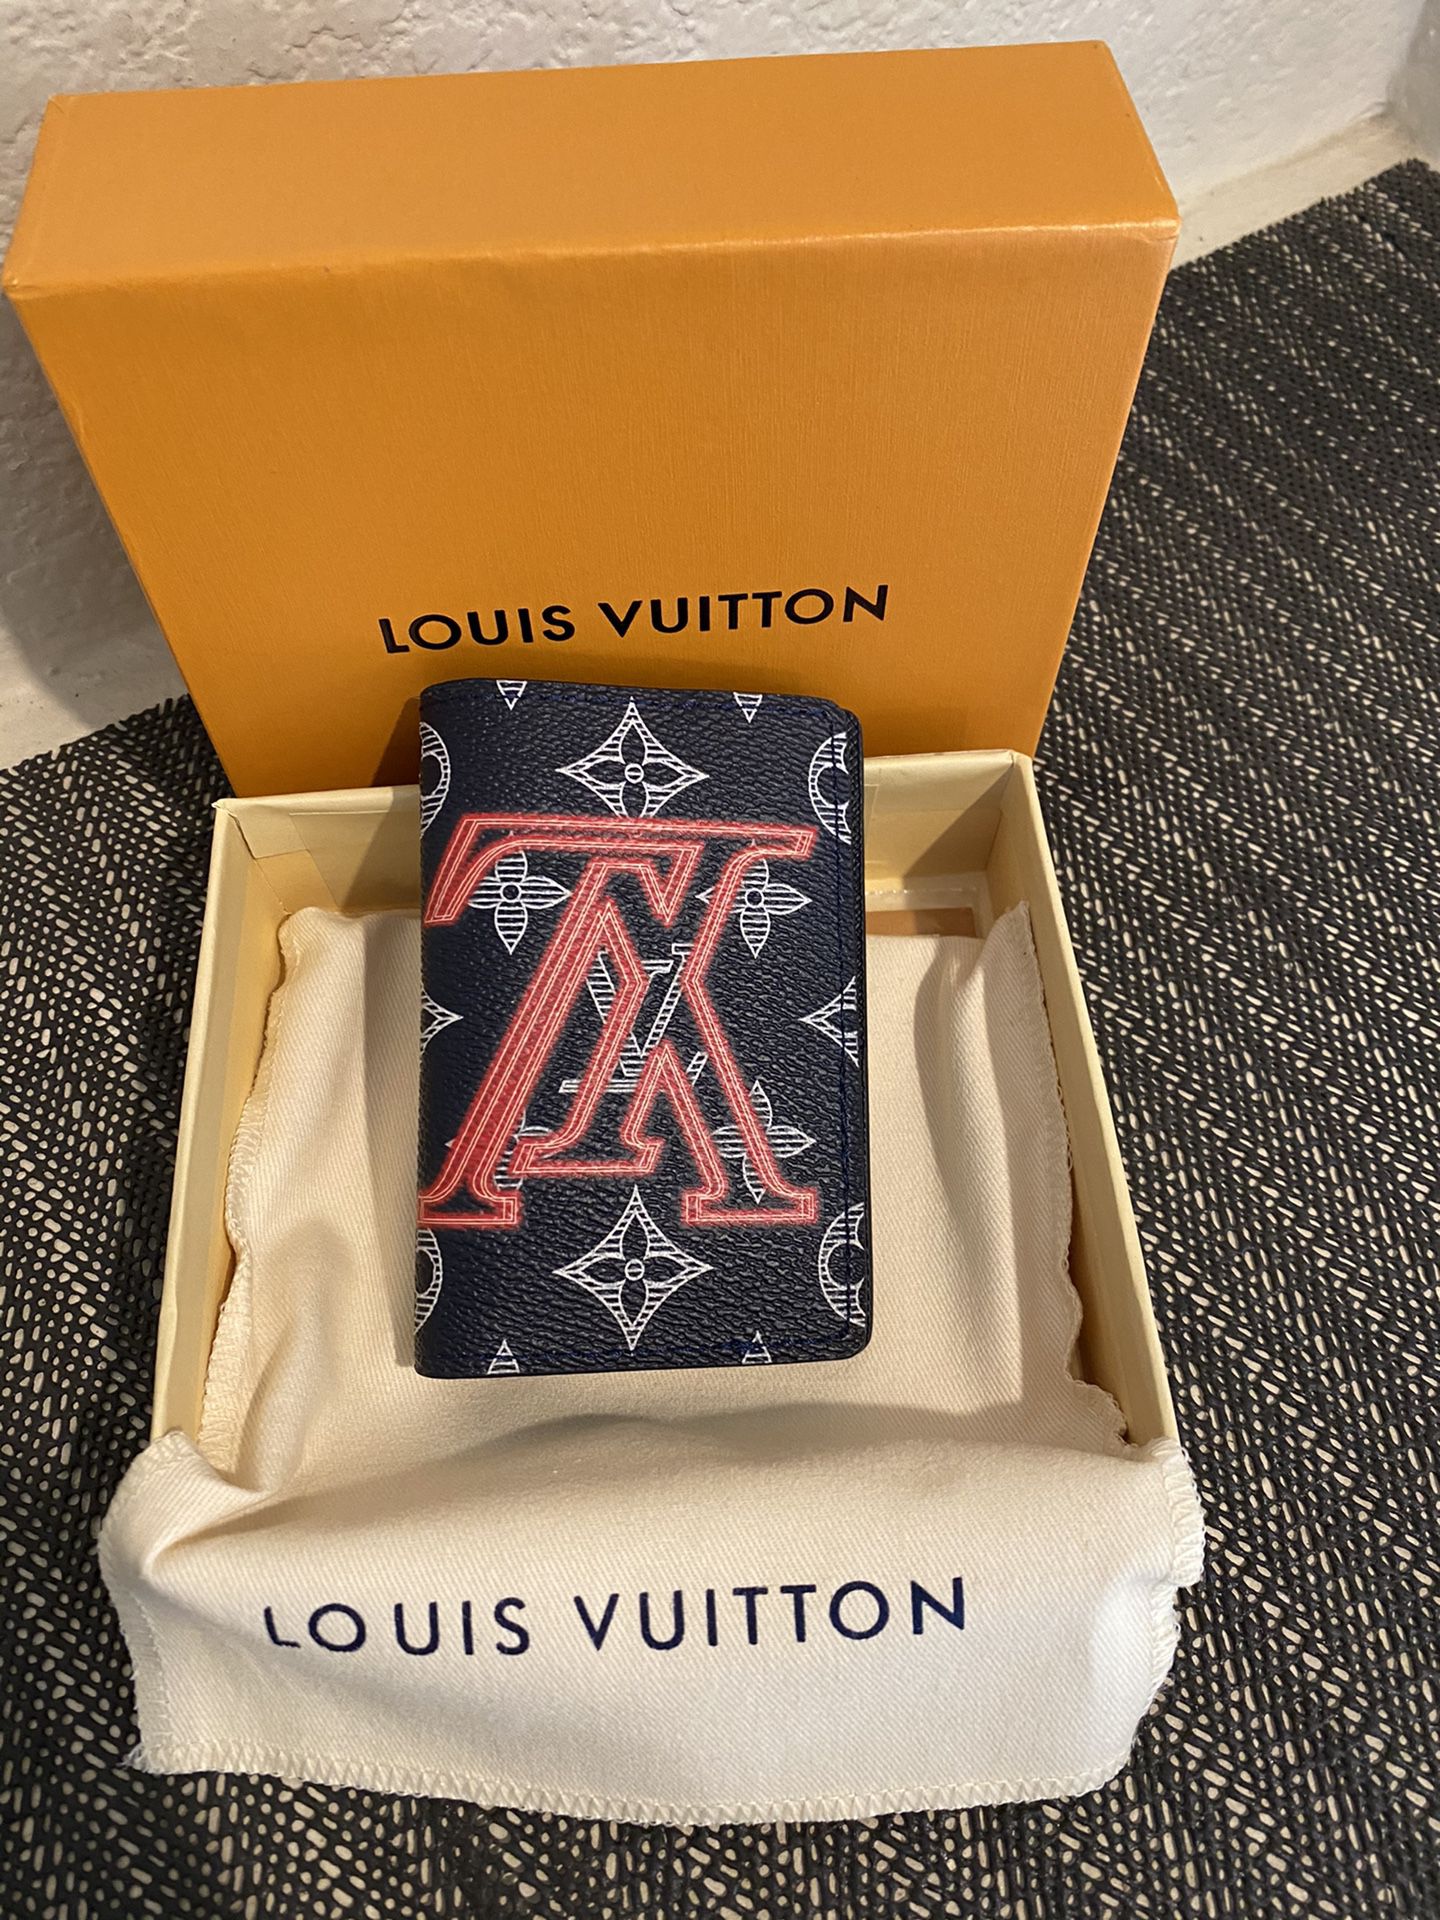 Louis Vuitton Kim Jones Wallet Black/ Red, Bifold, New With Box And Dust Bag